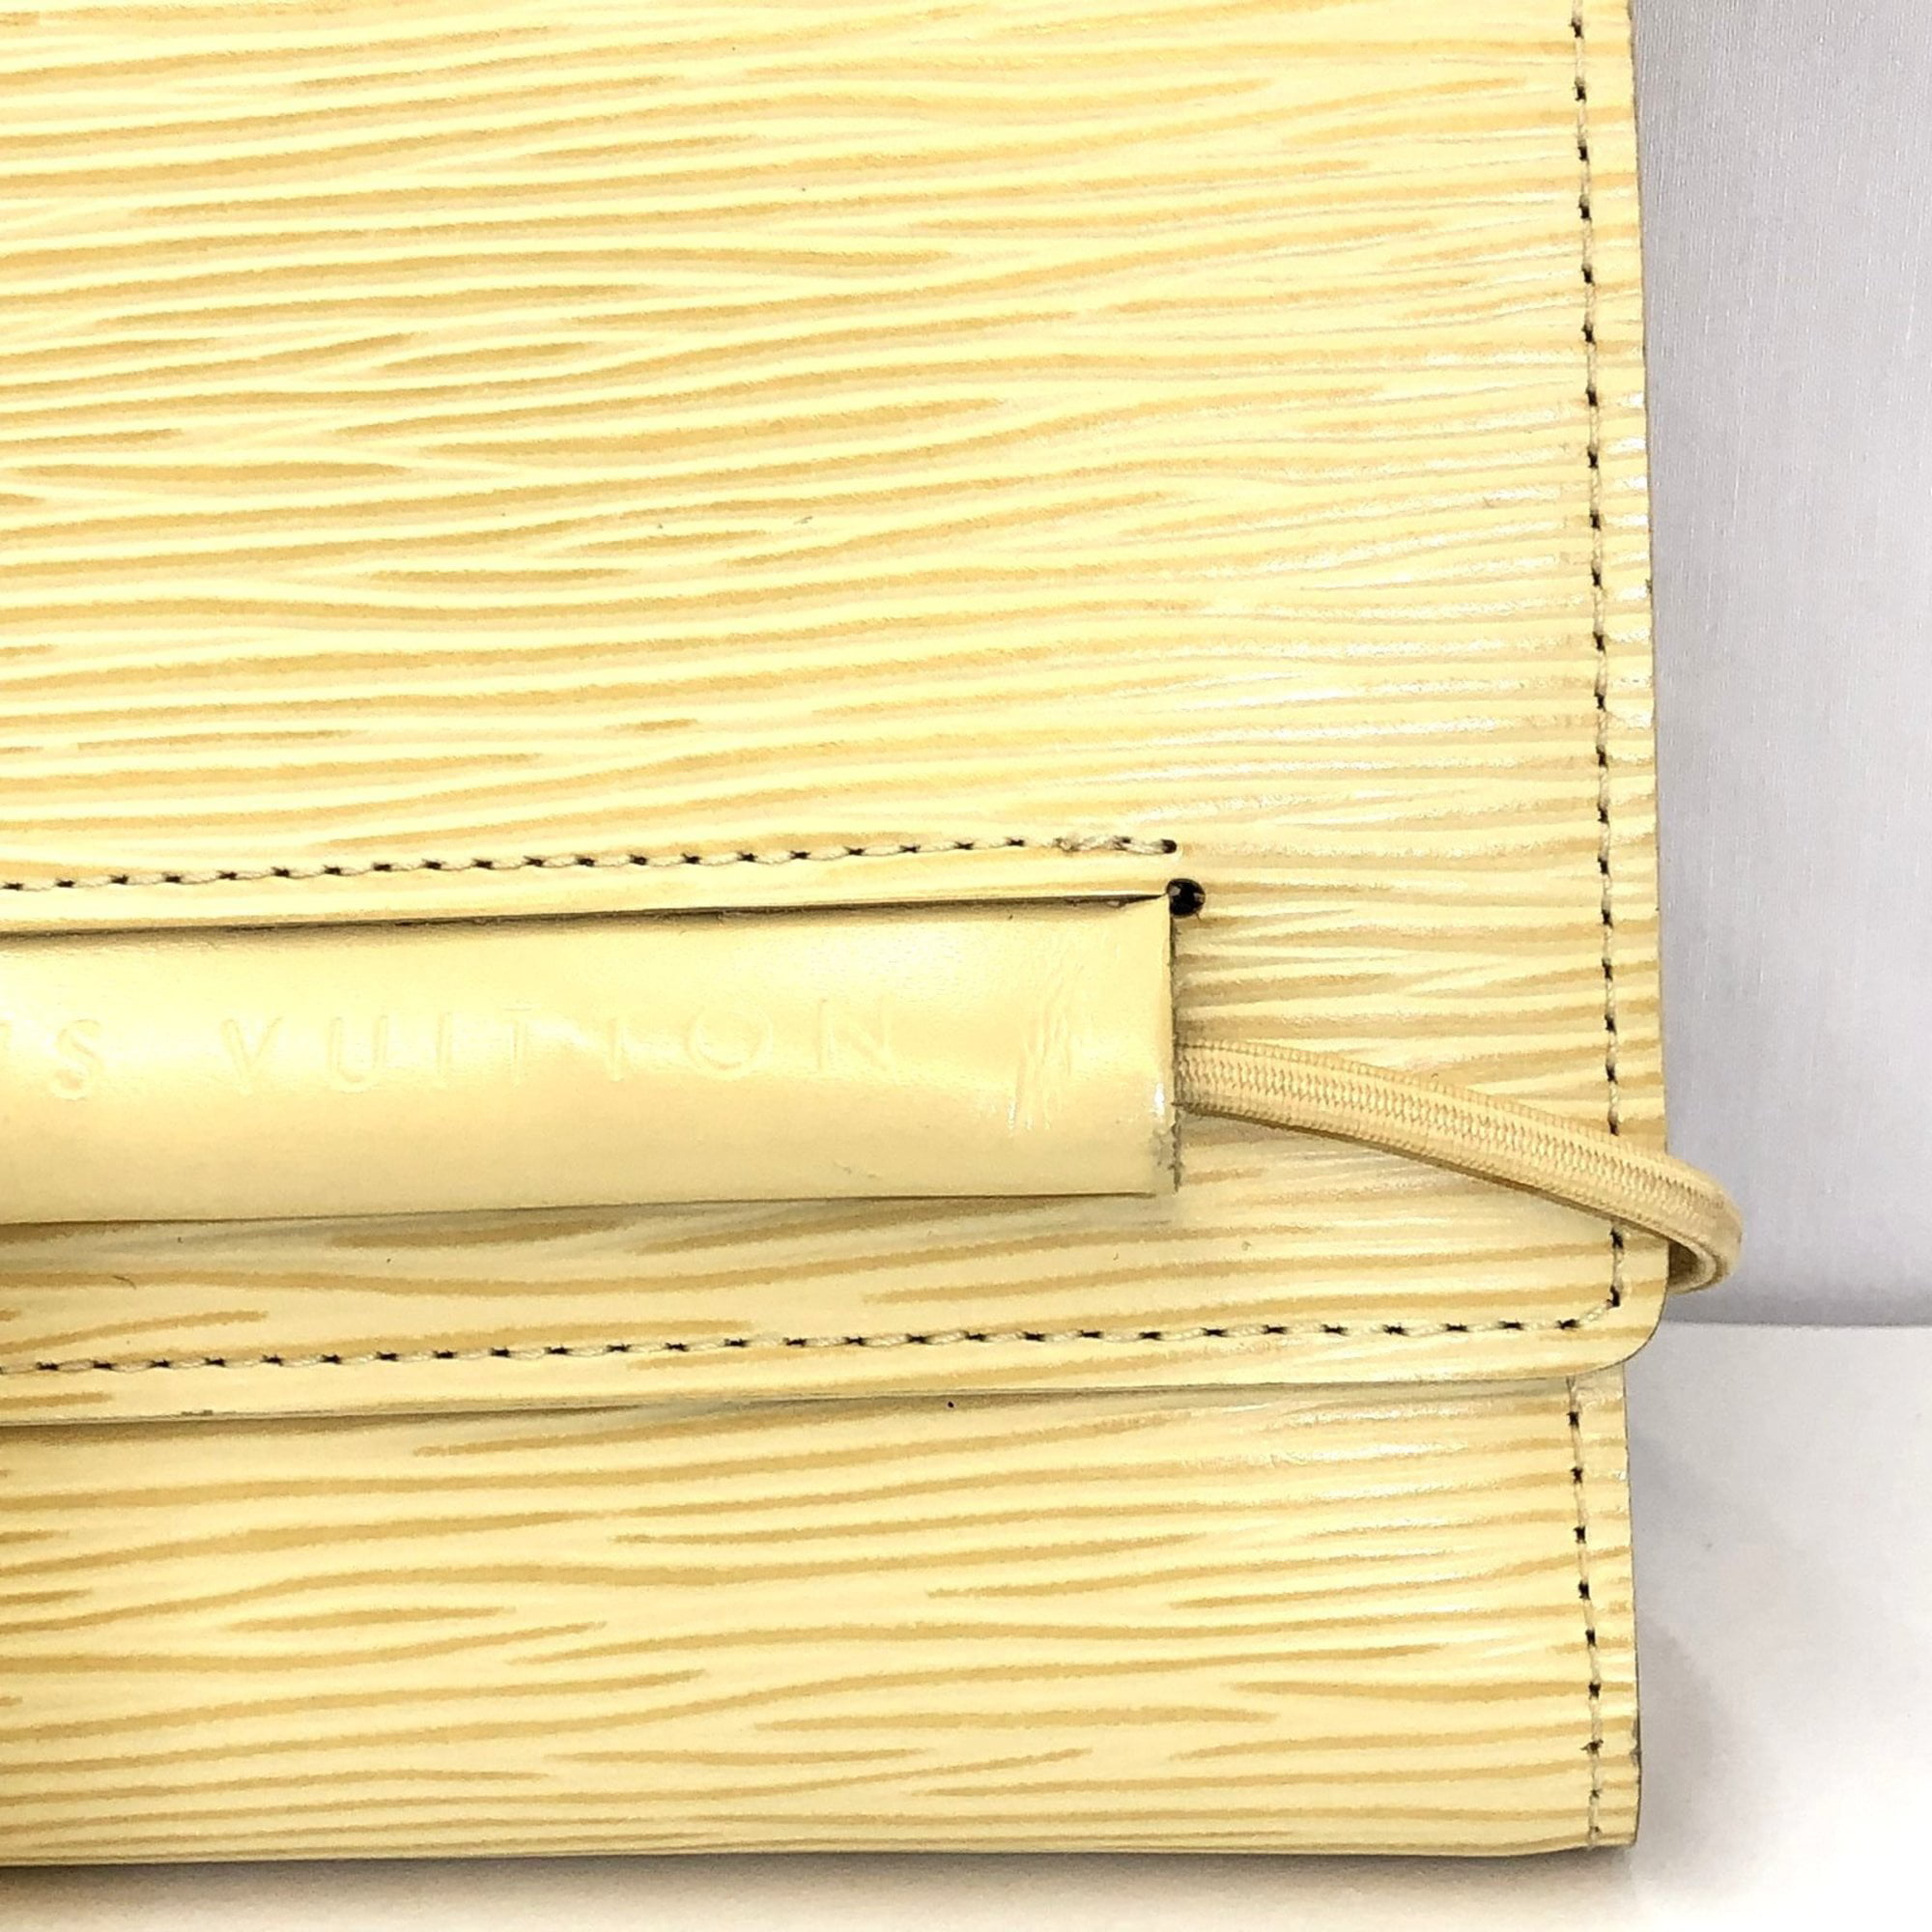 Authenticated used Louis Vuitton Louis Vuitton Trifold Wallet M6346A Portefeuille Elastic EPI Cream Yellow French Rubber Band with Coin Purse Compact